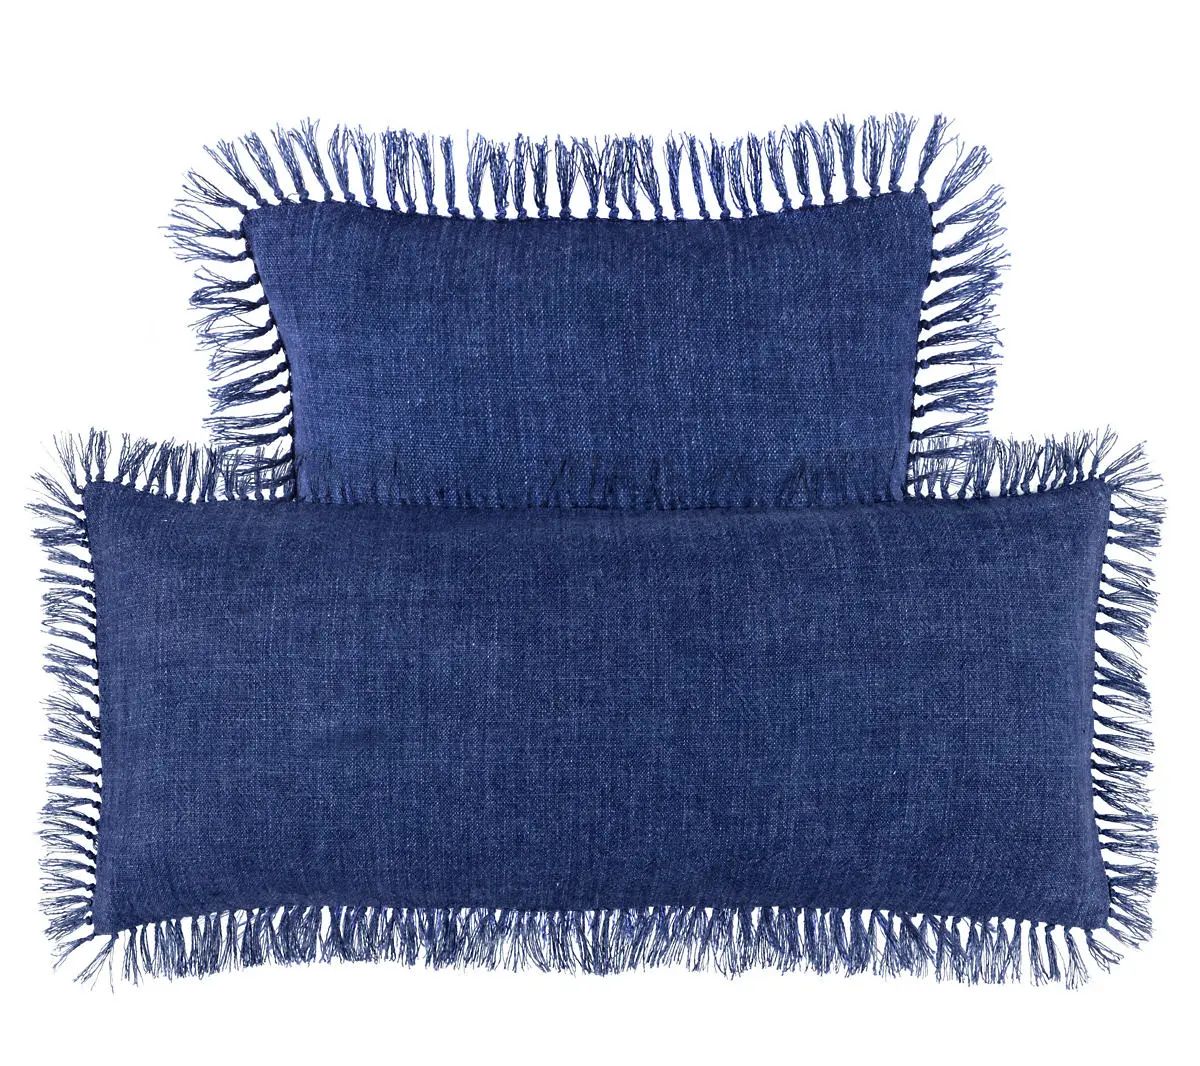 Laundered Linen Indigo Decorative Pillow | The Outlet | Annie Selke